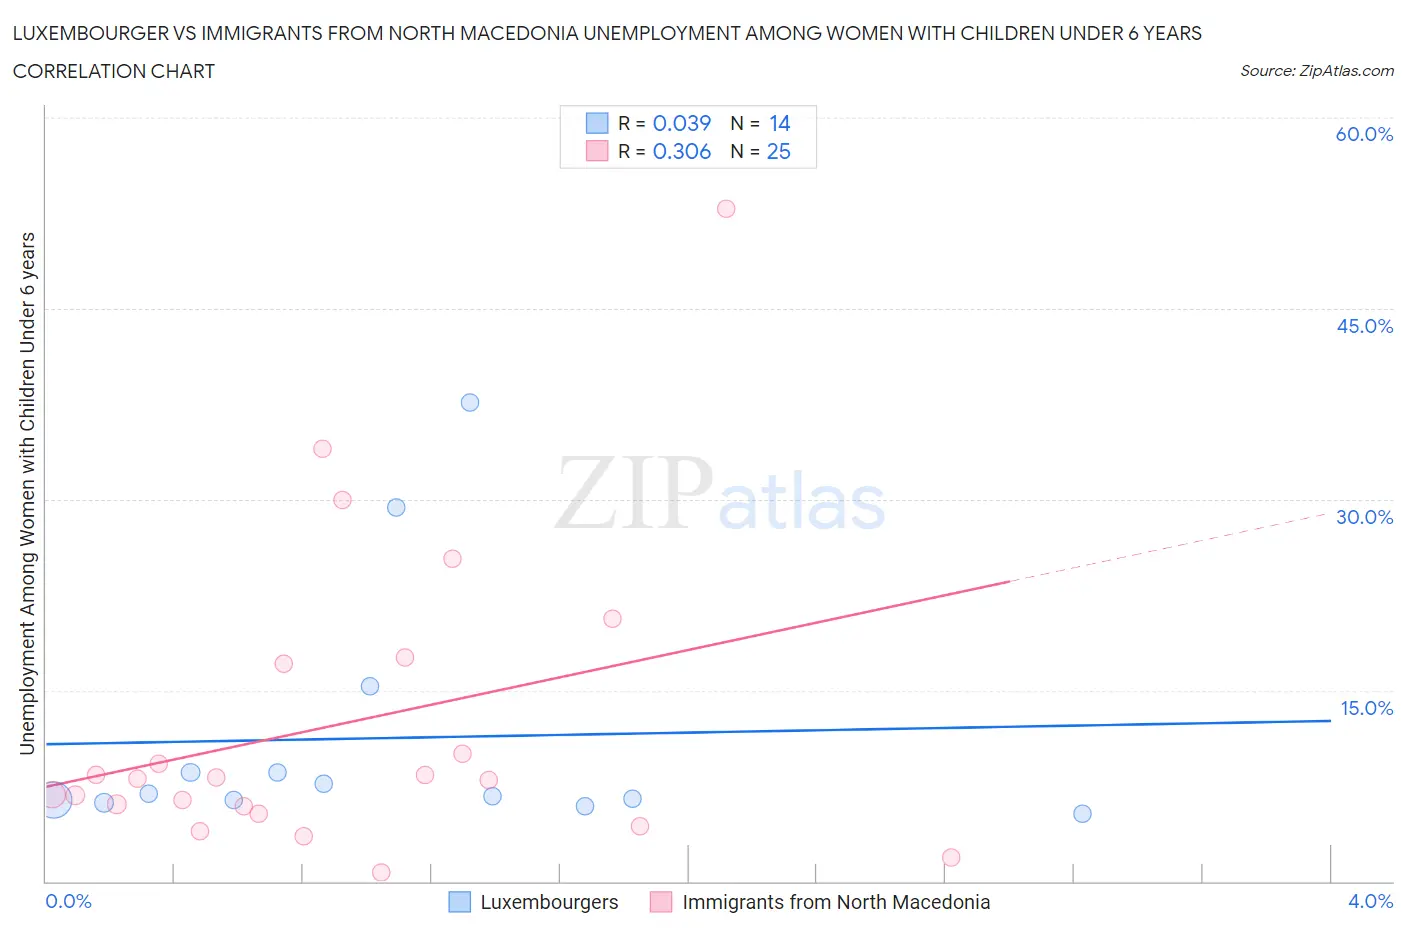 Luxembourger vs Immigrants from North Macedonia Unemployment Among Women with Children Under 6 years